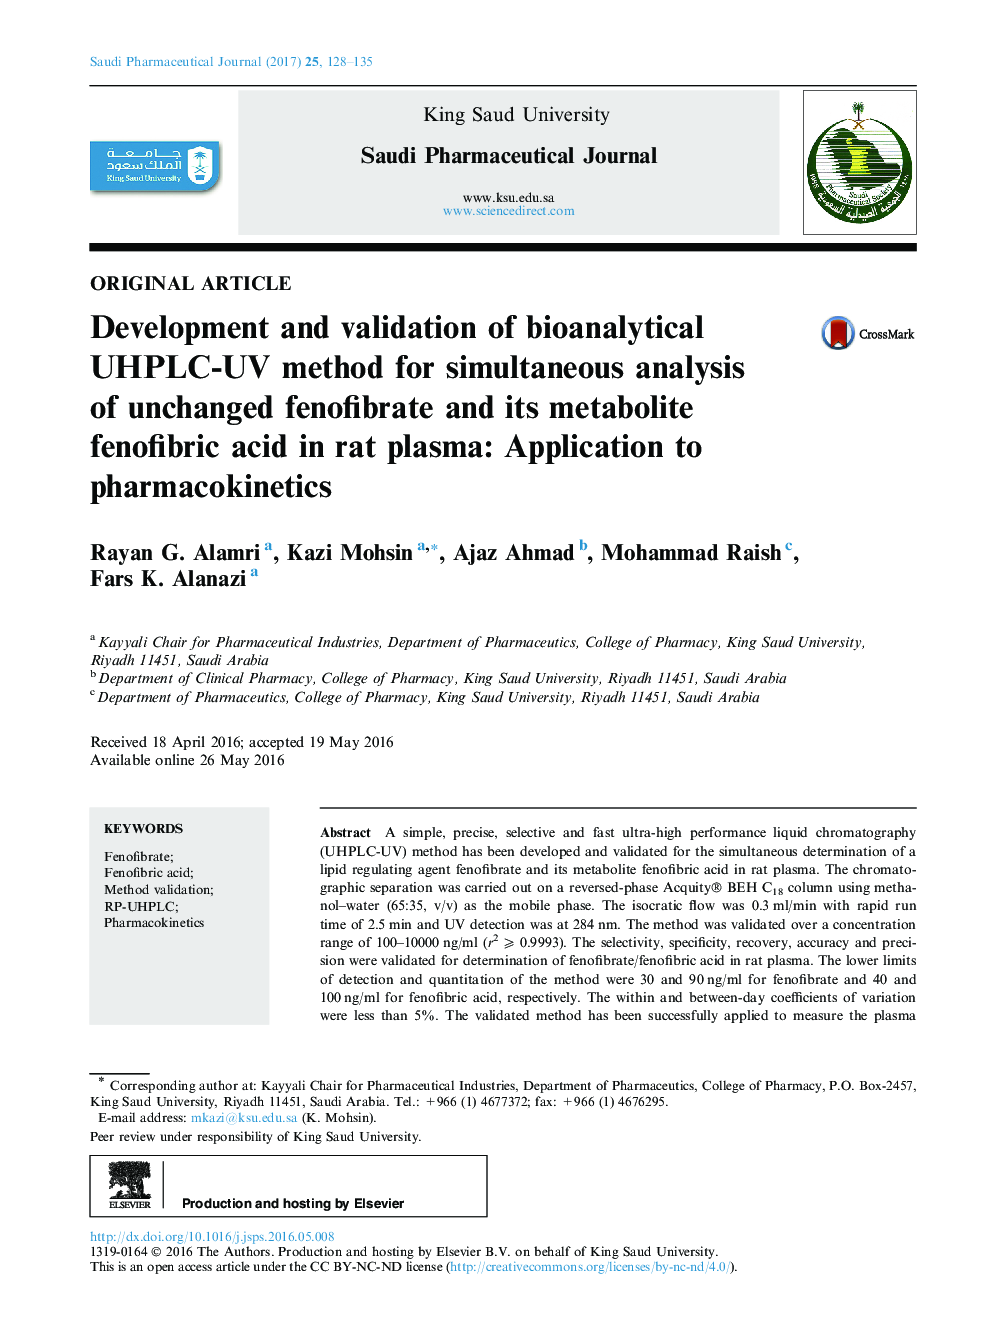 Development and validation of bioanalytical UHPLC-UV method for simultaneous analysis of unchanged fenofibrate and its metabolite fenofibric acid in rat plasma: Application to pharmacokinetics